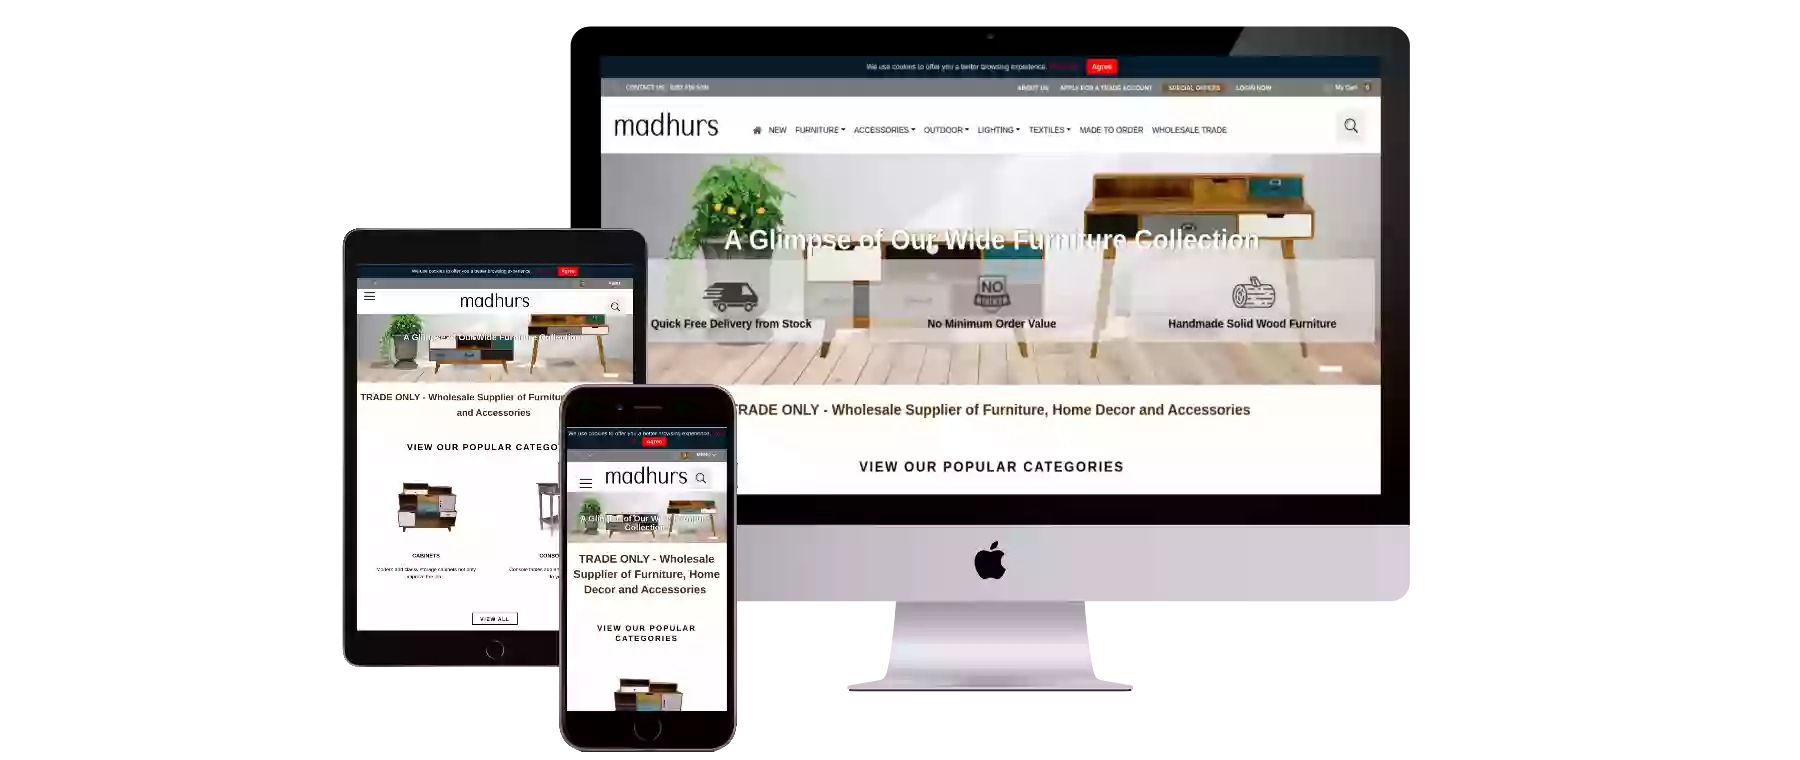 Madhurs | Wholesale Furniture Supplier - Trade Only